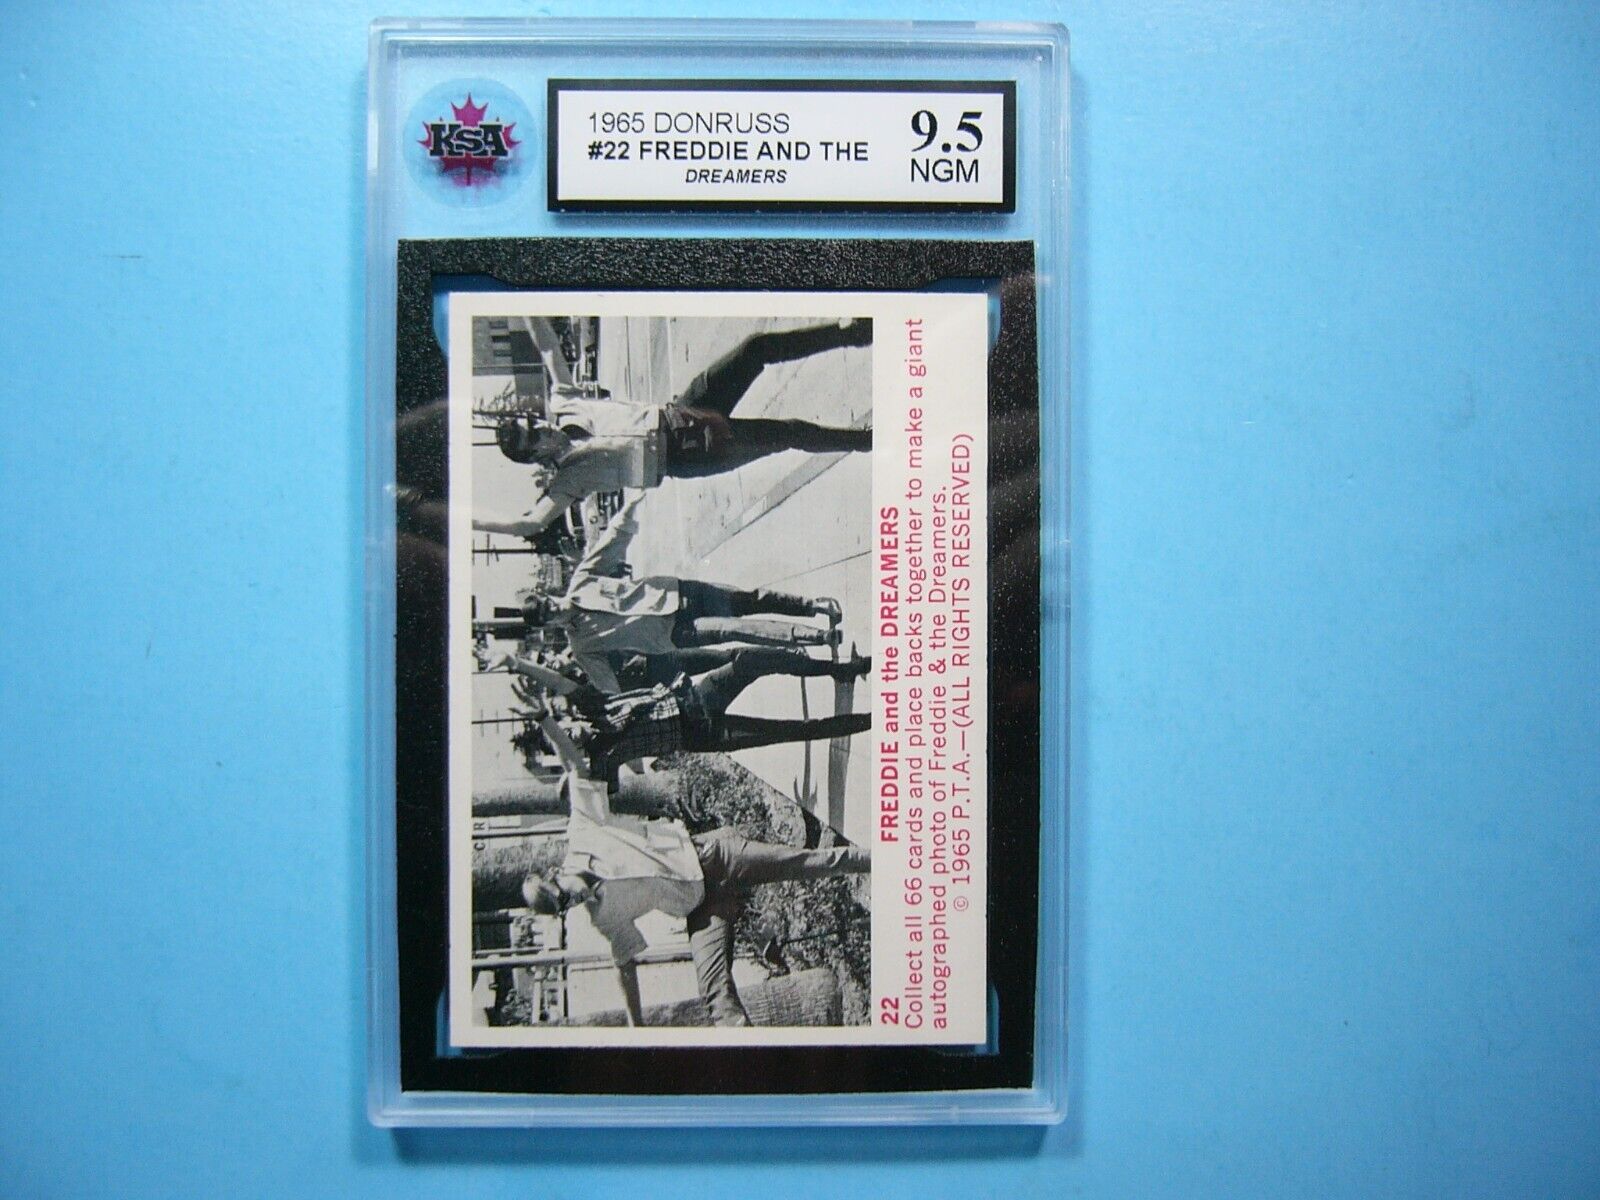 1965 DONRUSS FREDDIE AND THE DREAMERS TRADING CARD #22 THE BAND KSA 9.5 NGM GL